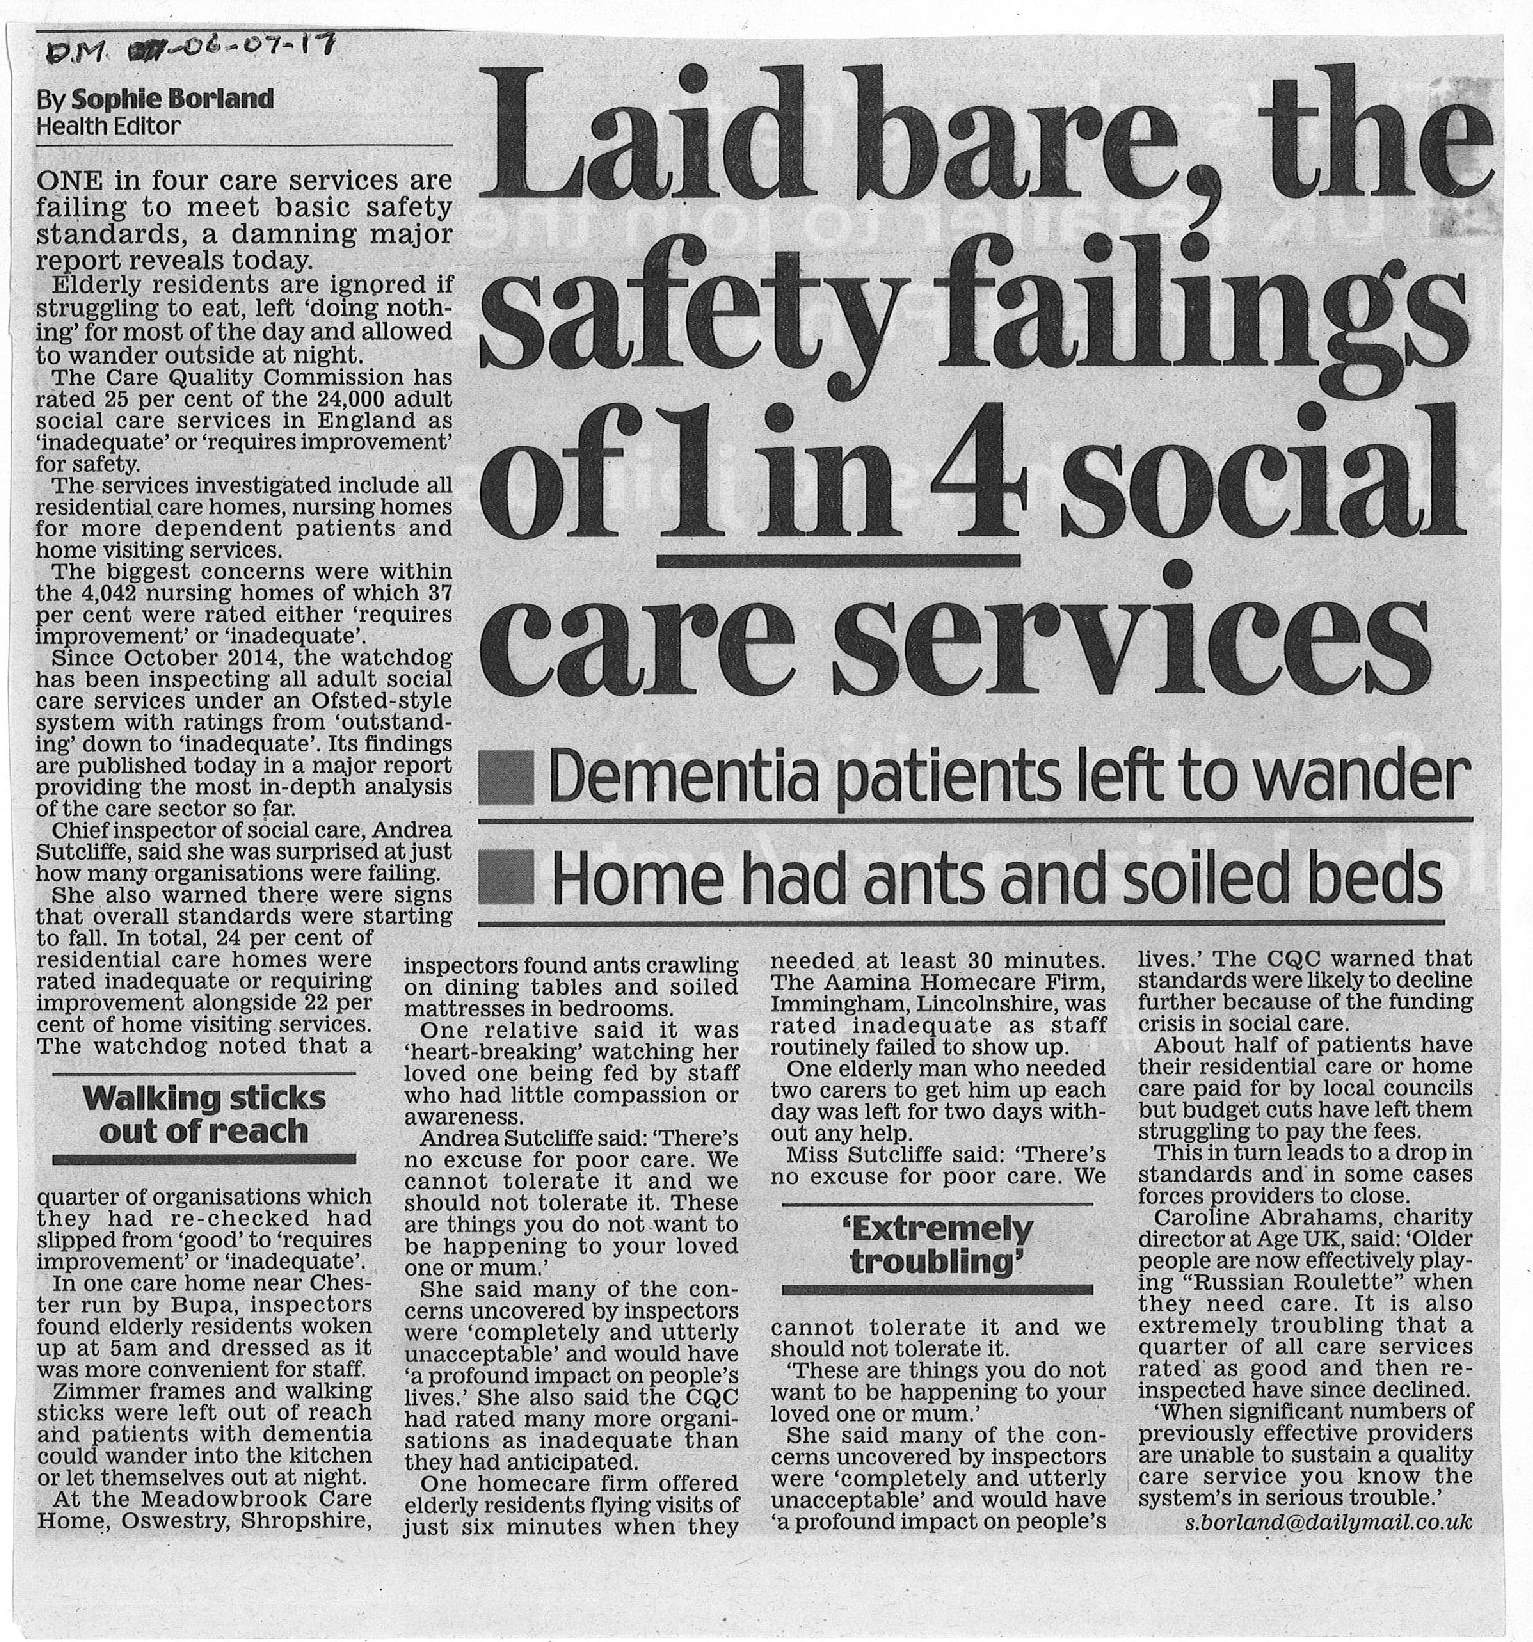 Laid bare, the safety failings on 1 in 4 social care services